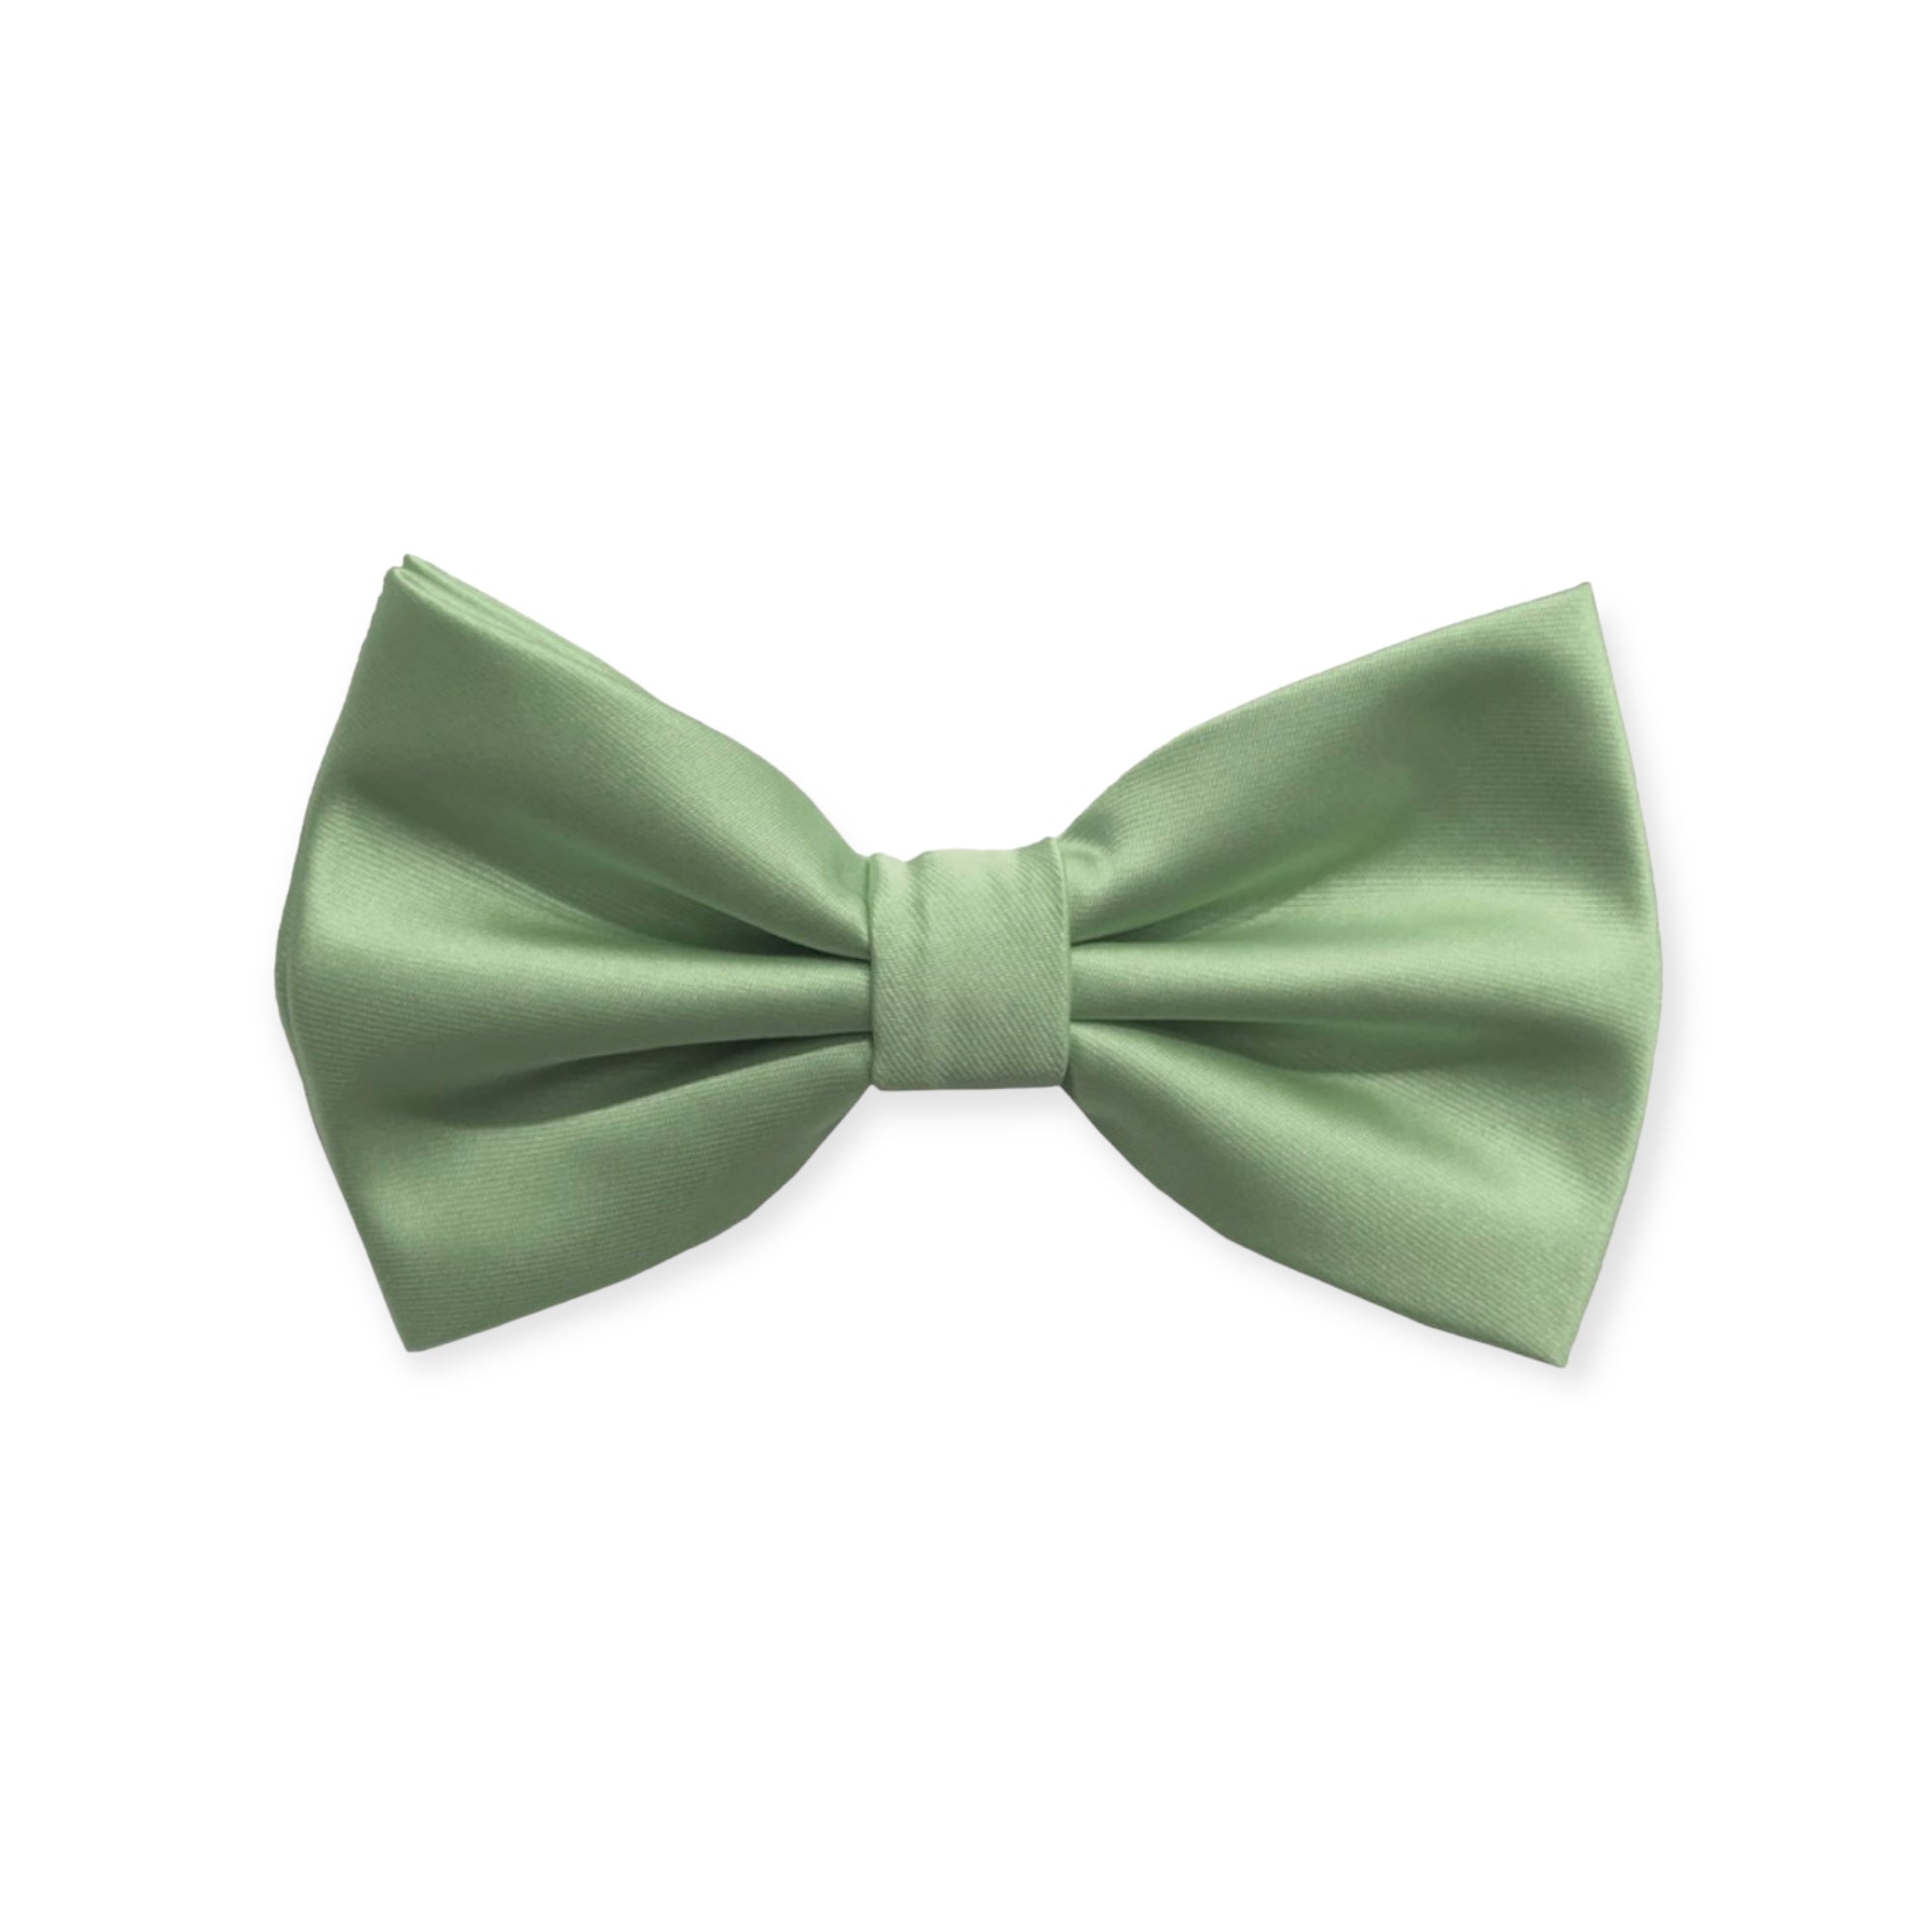 Solid Mint Bow Tie and Hanky